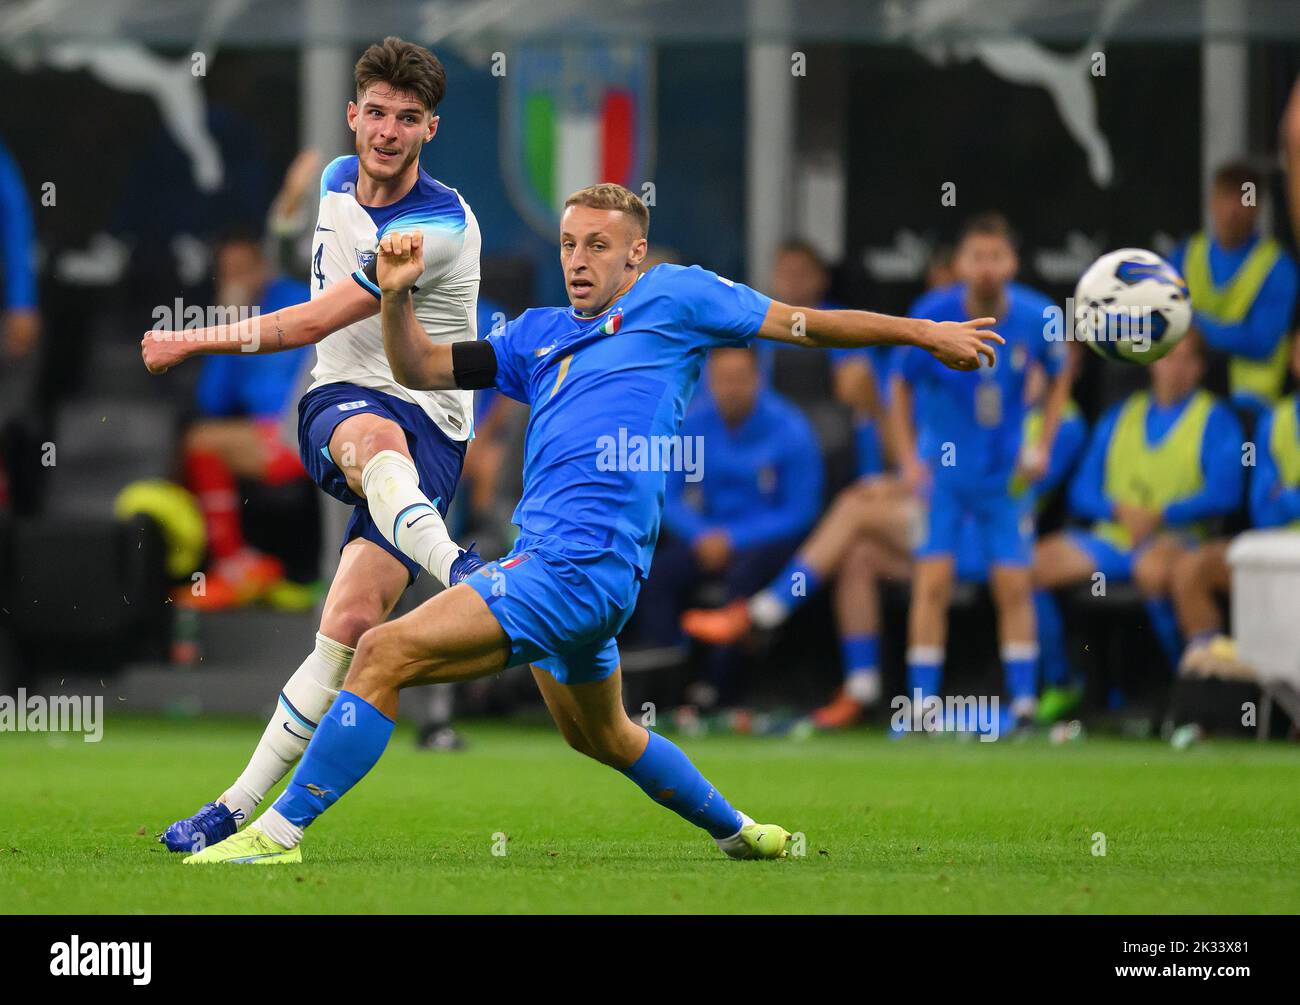 23 Sep 2022 - Italy v England - UEFA Nations League - Group 3 - San Siro  England's Declan Rice fires in a shot during the UEFA Nations League match against Italy. Picture : Mark Pain / Alamy Live News Stock Photo